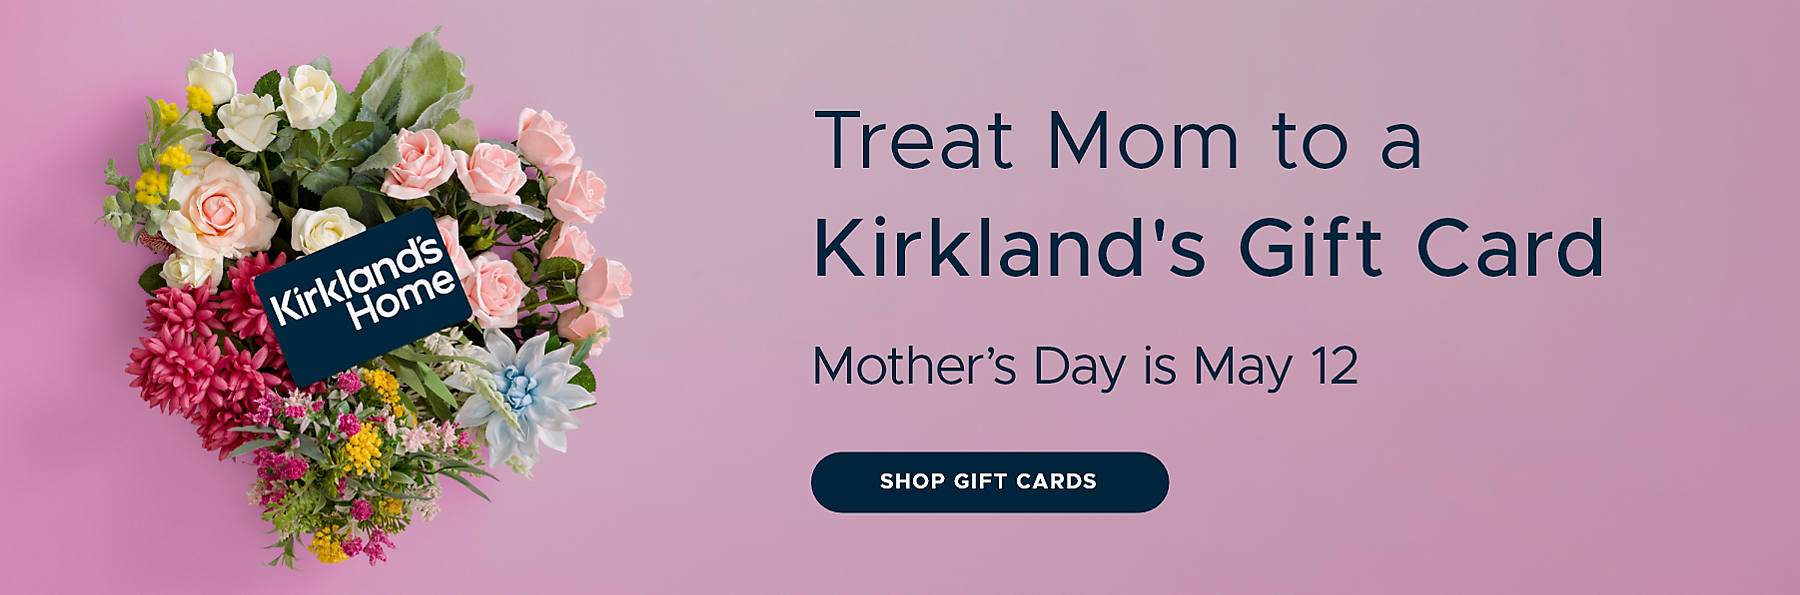 Treat Mom to a Kirkland's Gift Card Mother's Day is May 12 Shop Gift Cards